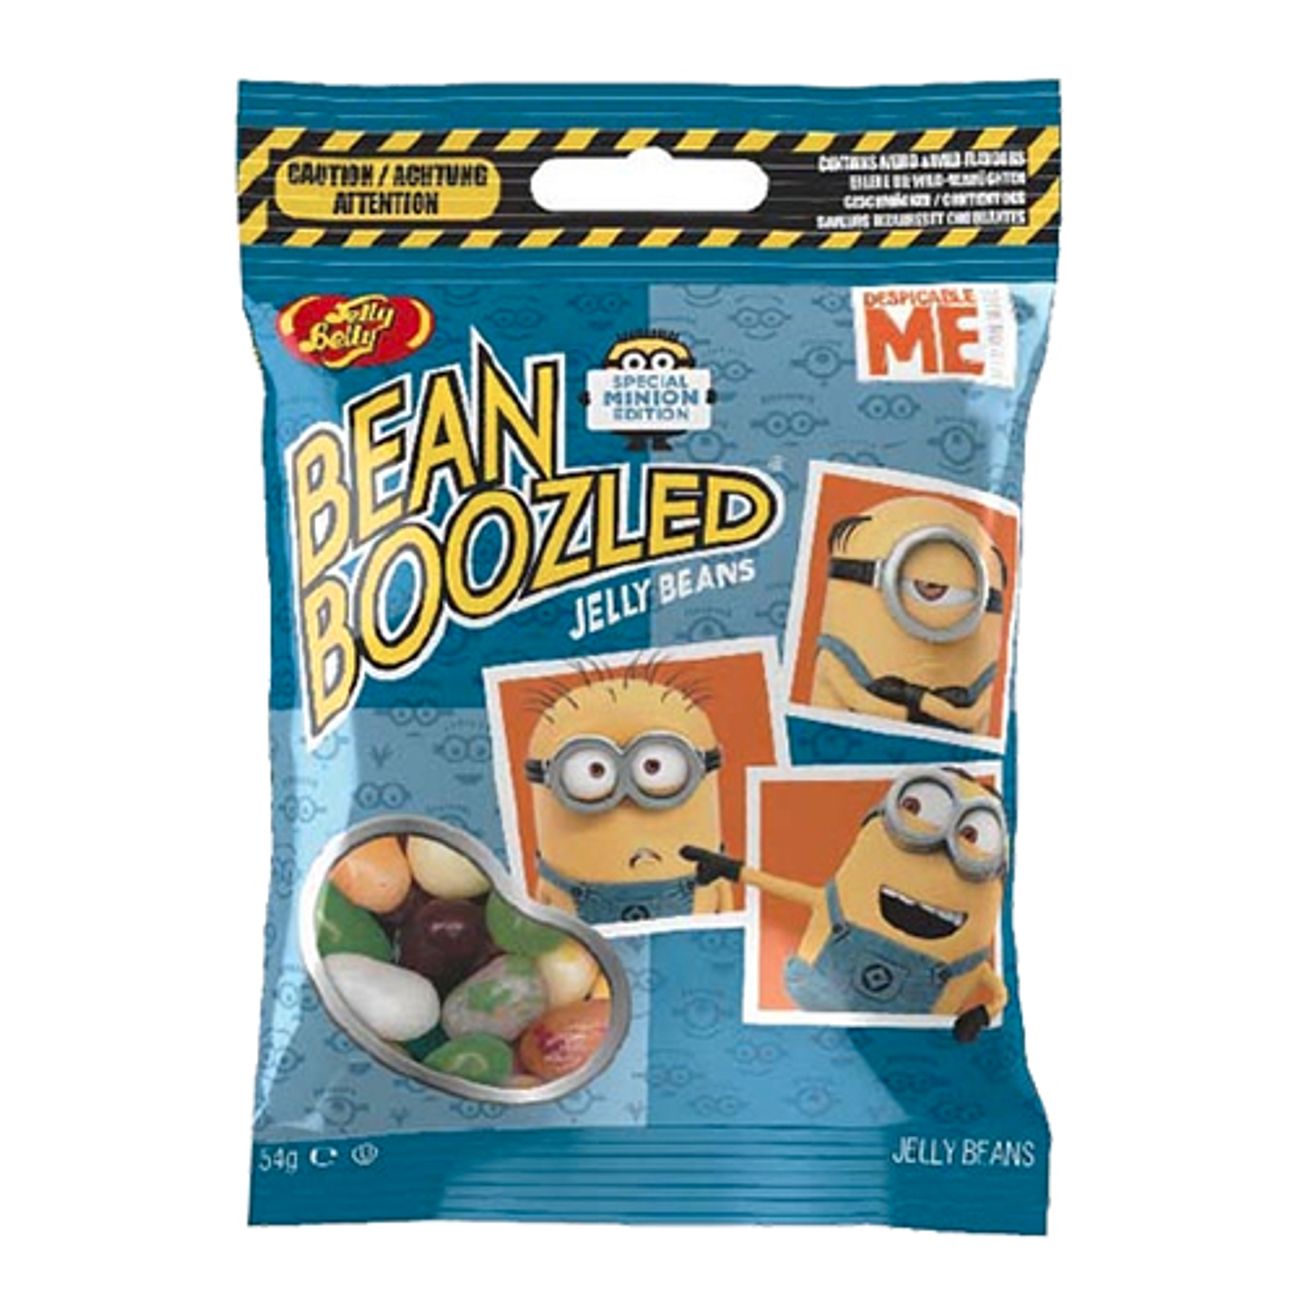 jelly-belly-beanboozled-minions-bag-1